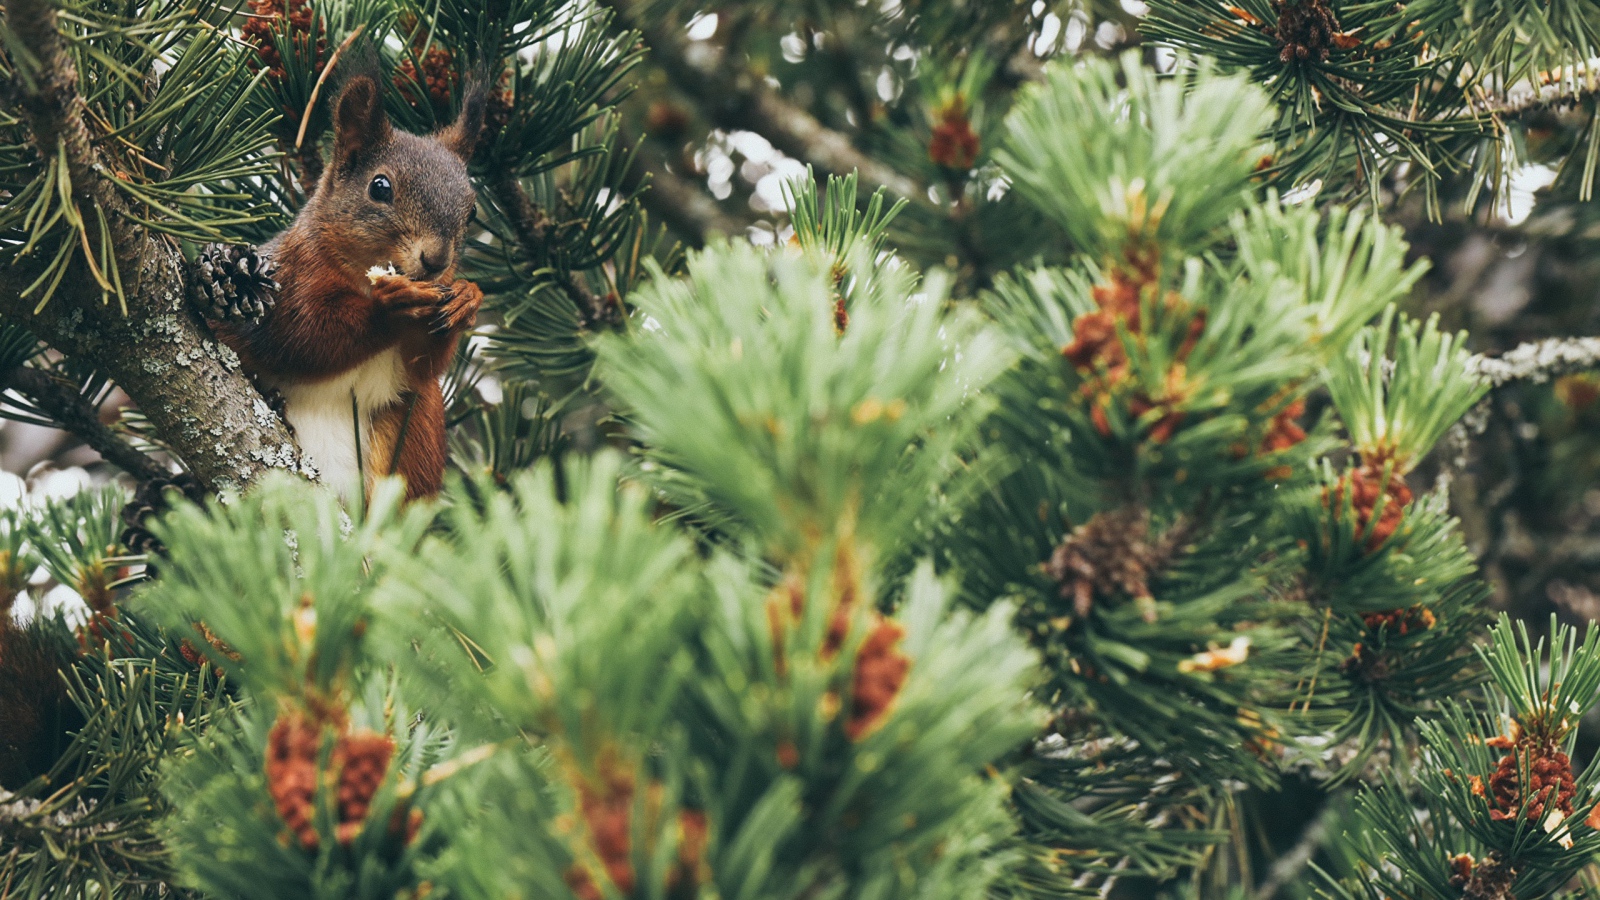 Squirrel gnaws a nut on a pine branch